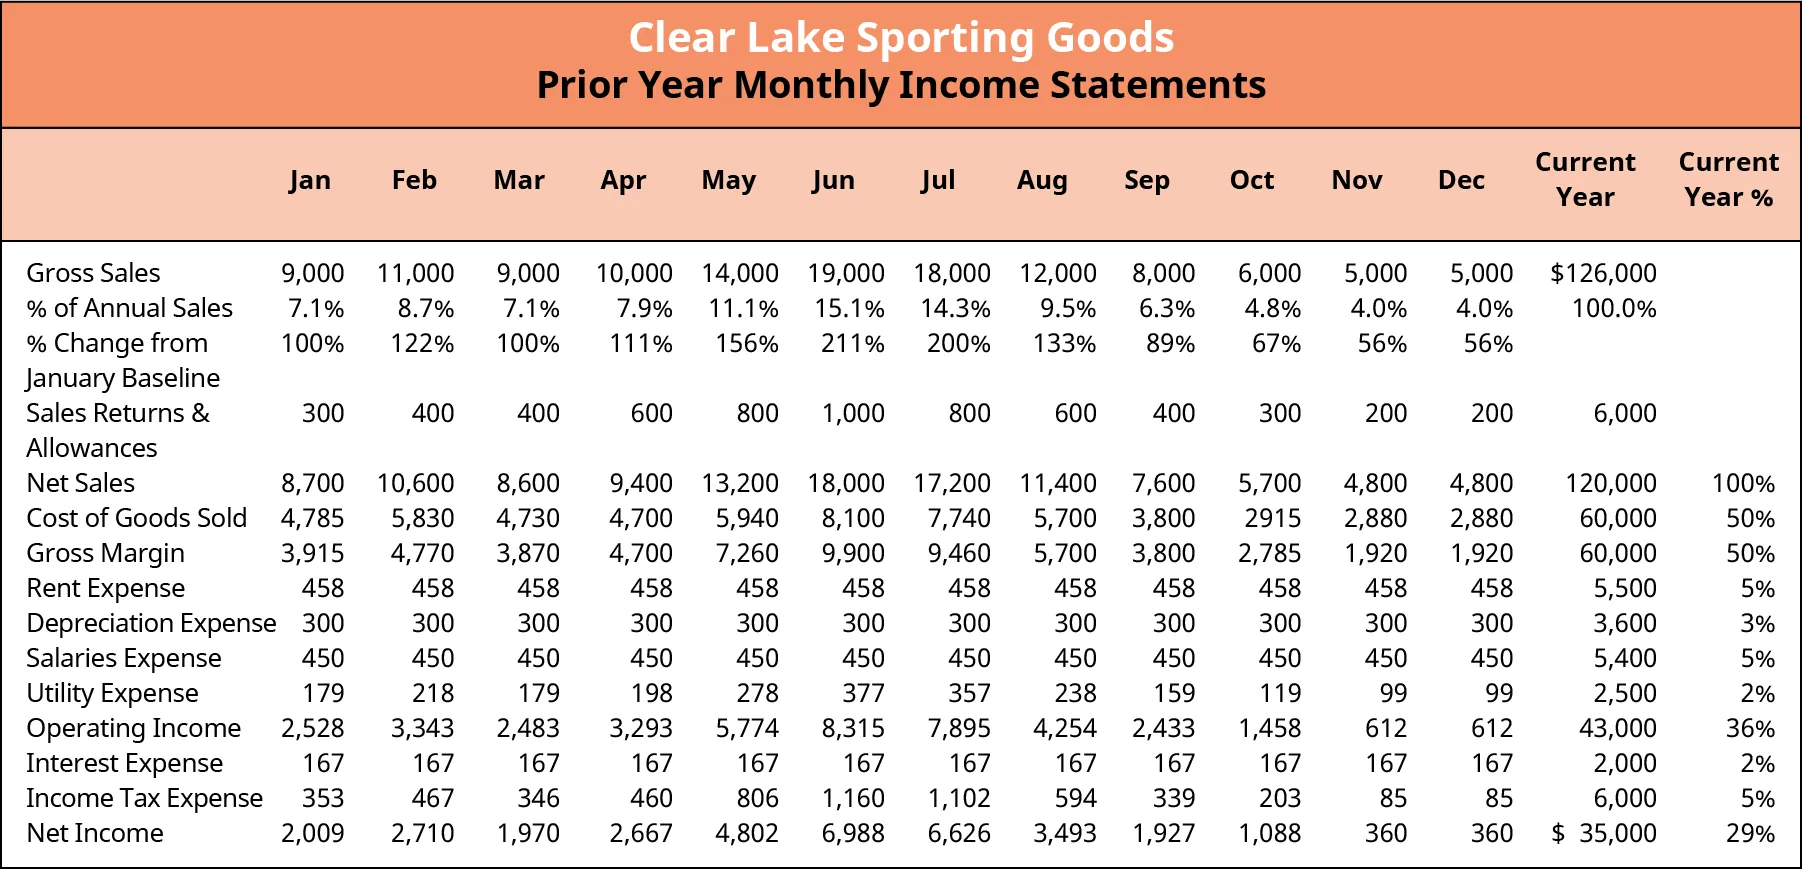 Prior year monthly income statement by month. It shows the gross monthly sales from January to December, and calculates the net income for all of the previous twelve months.